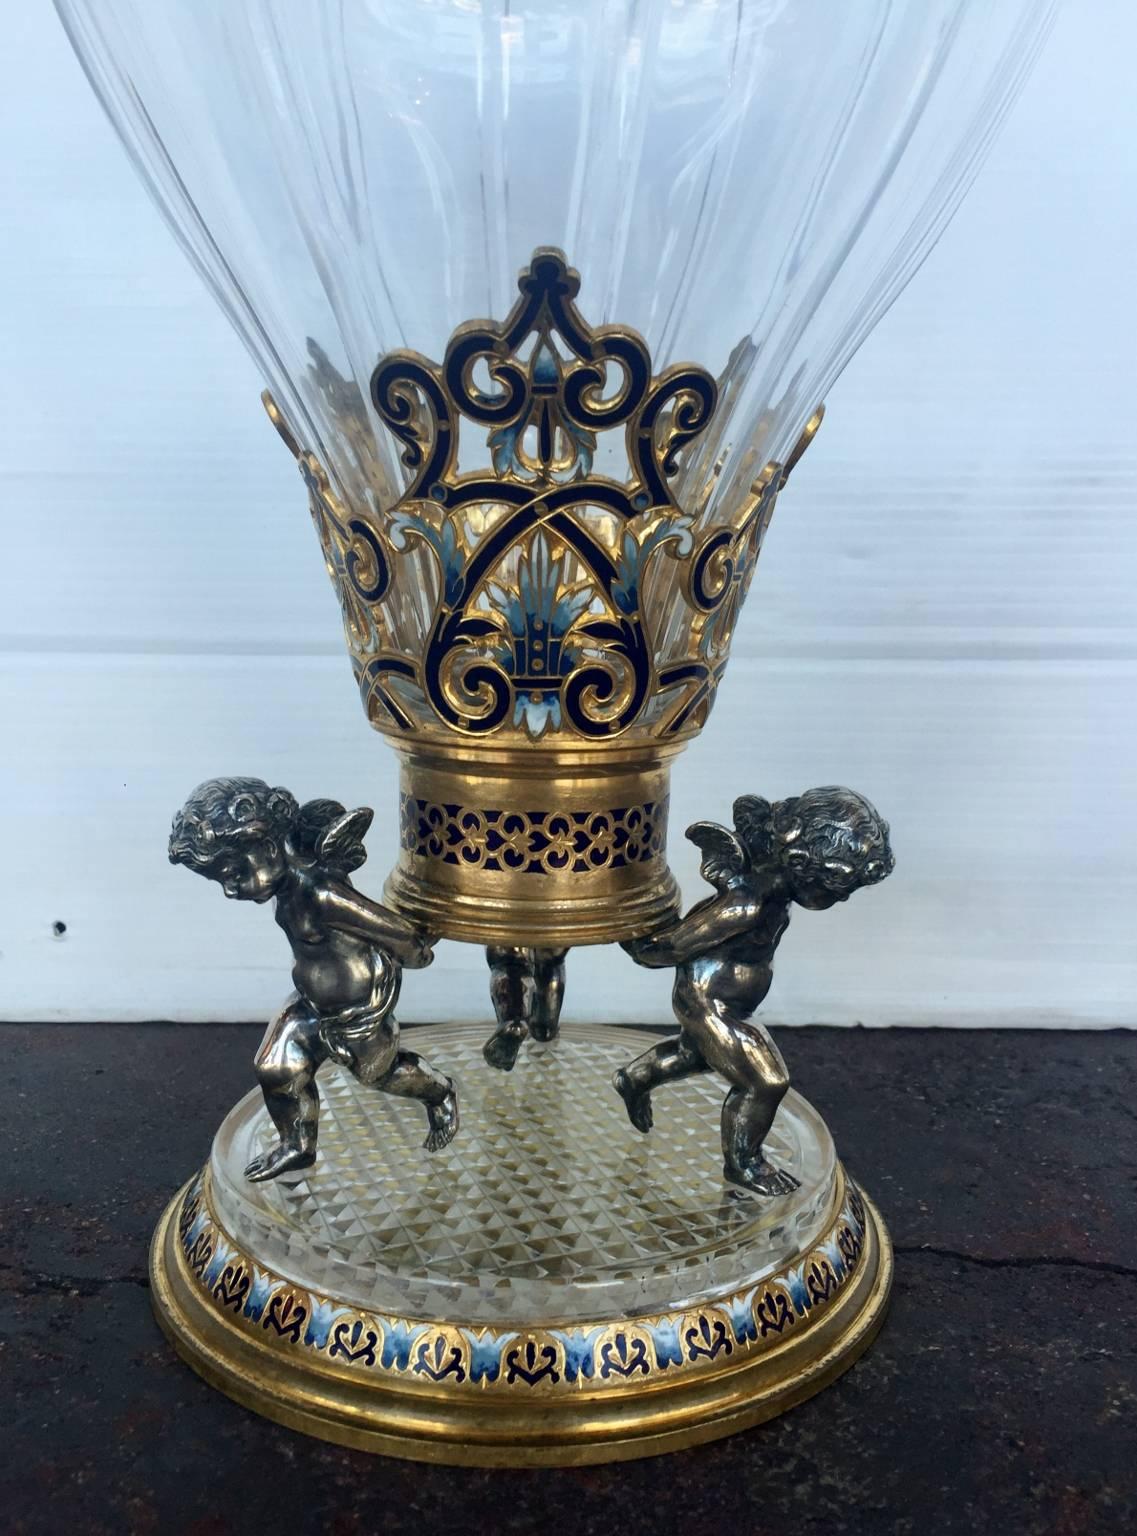 19th century French 19th century French Champlevé enamel and Baccarat glass vase. The base of the vase has three cherubs supporting the structure of the glass vase with champlevé enamel. Enamel and Baccarat glass vase.